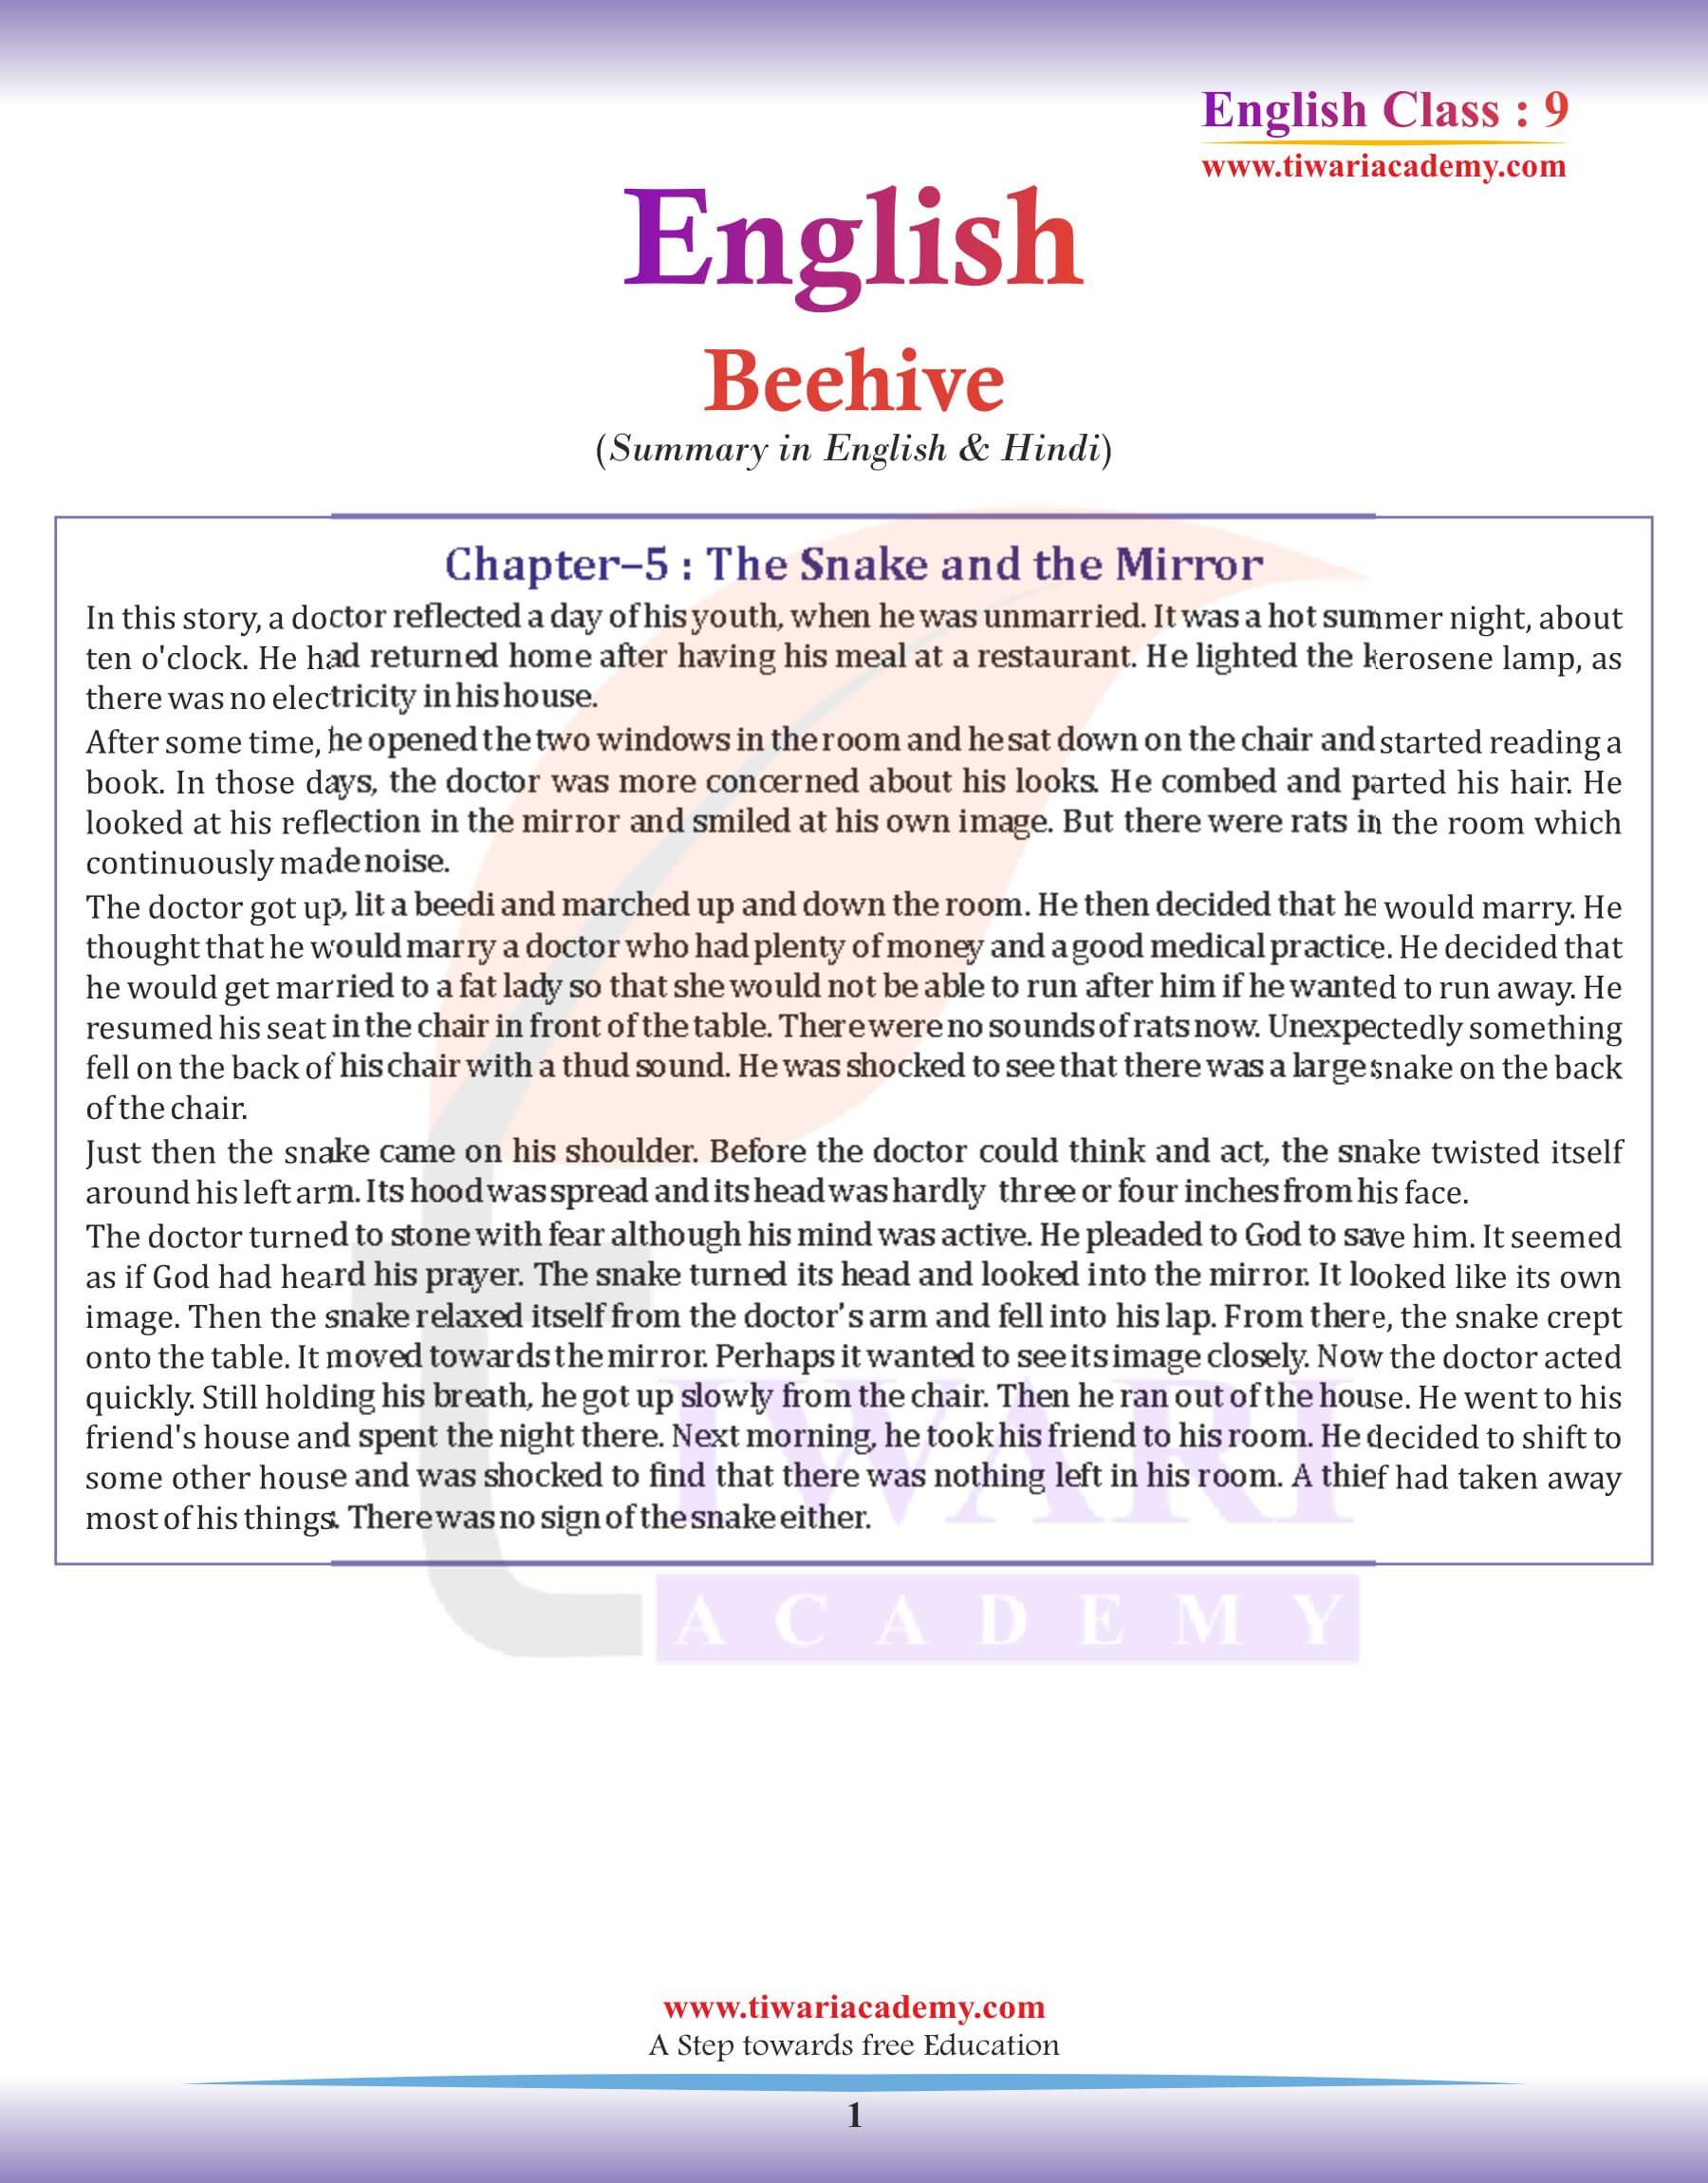 Class 9 English Beehive Chapter 5 Summary in English